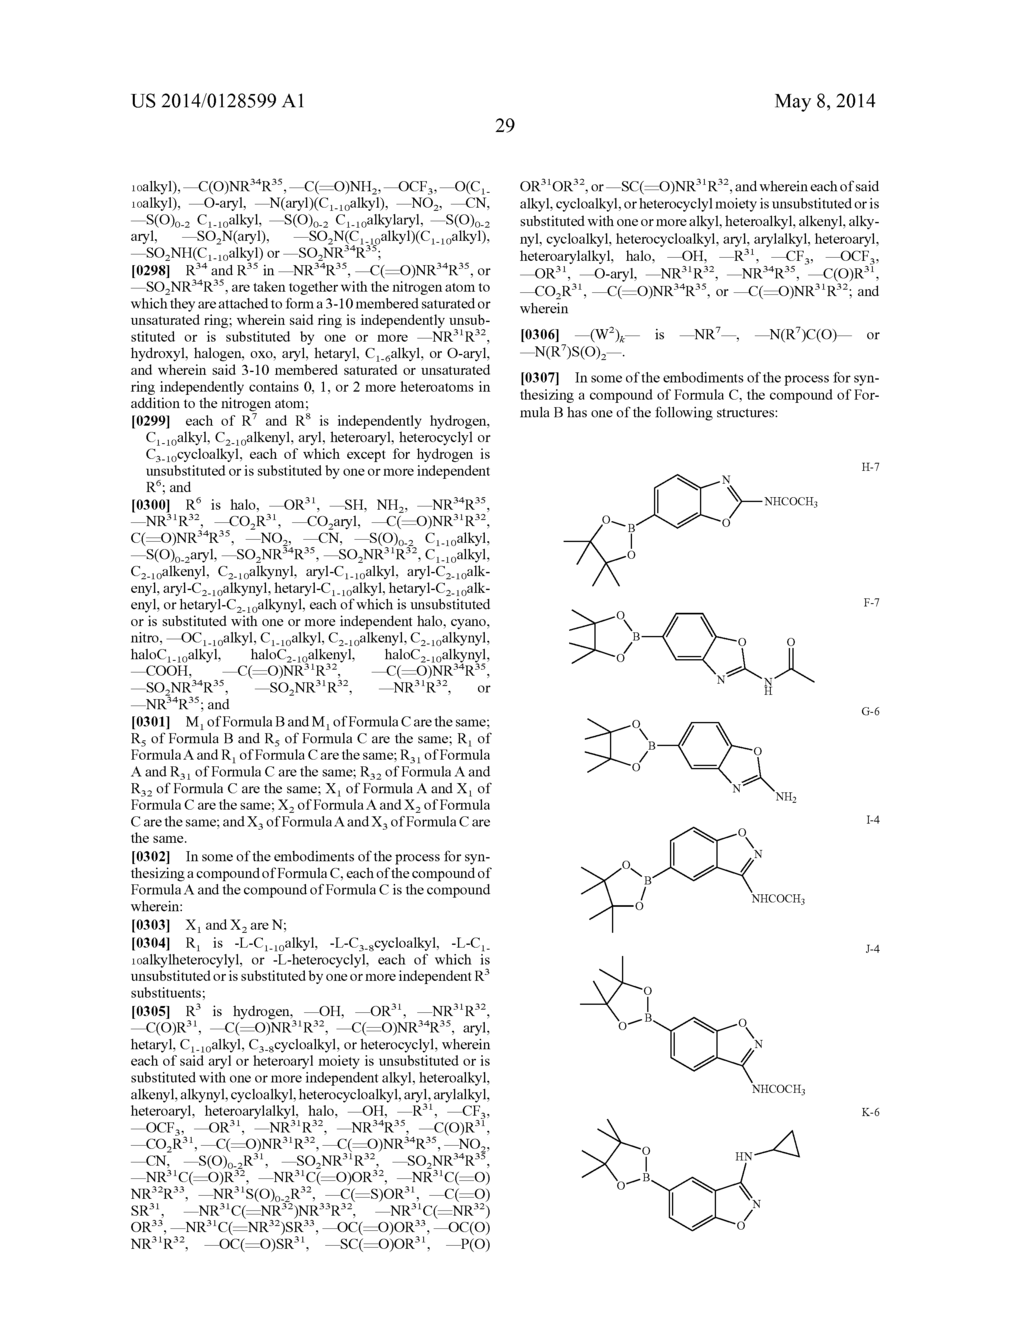 BENZOXAZOLE KINASE INHIBITORS AND METHODS OF USE - diagram, schematic, and image 50